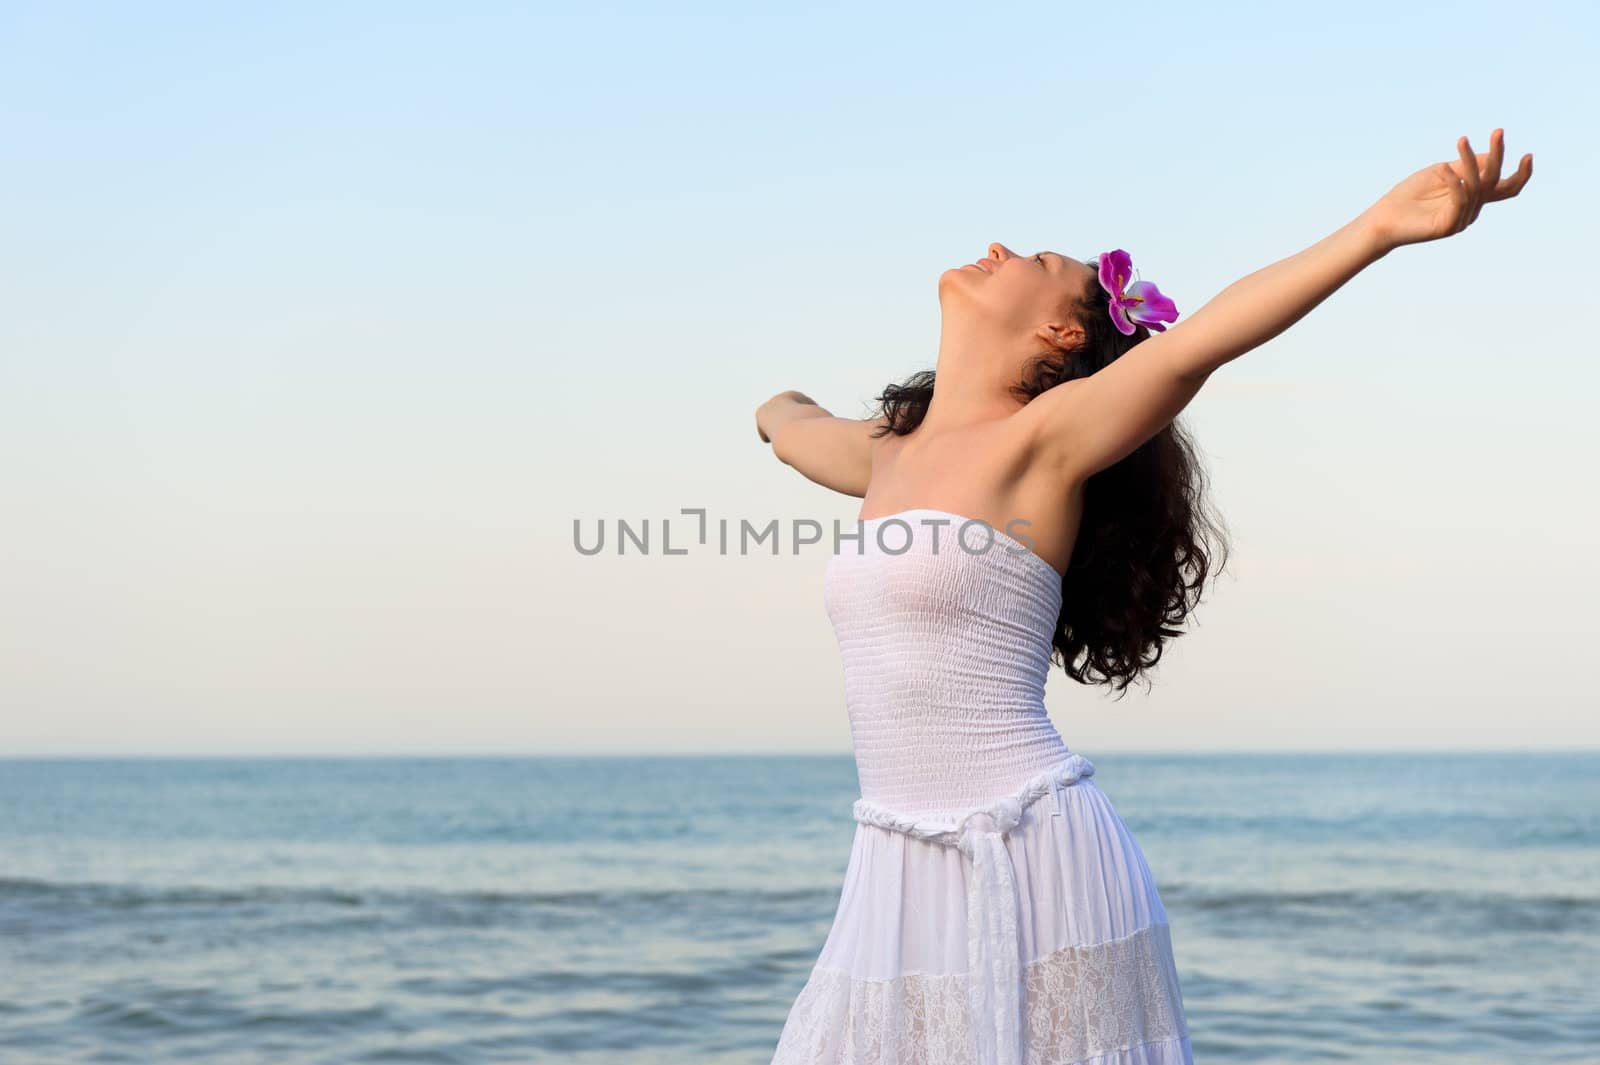 The woman in a white sundress on seacoast with open hands. A picturesque landscape